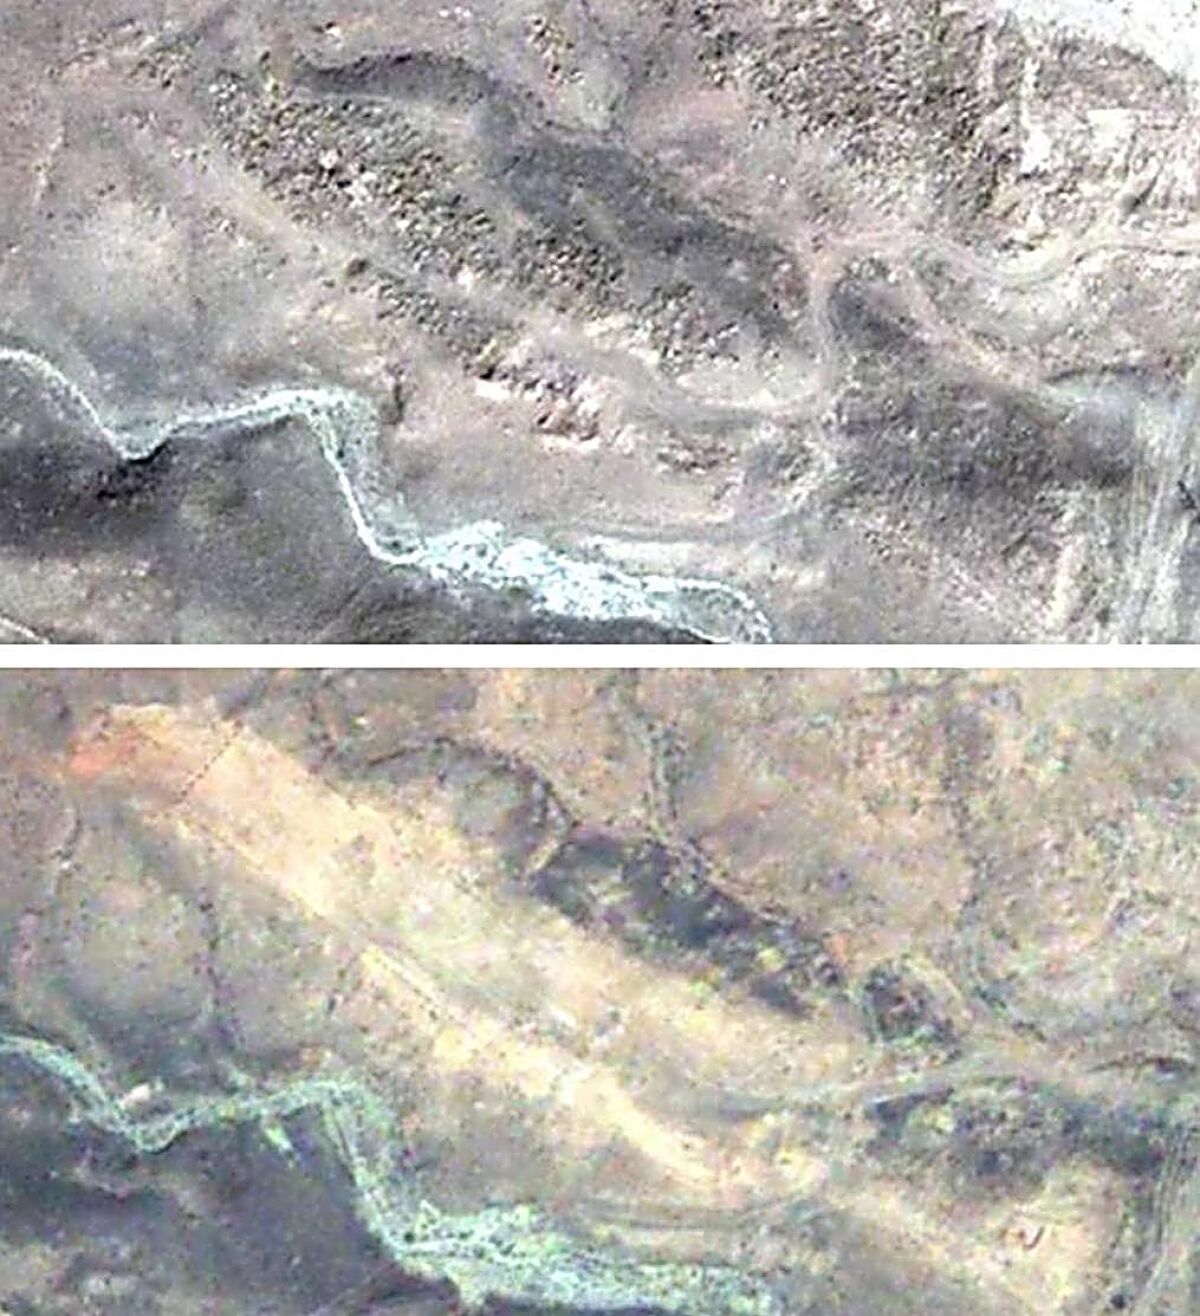 Satellite images from 2003, top, and 2009 show the demolition of the world's largest medieval Armenian cemetery in Djulfa, activists say.